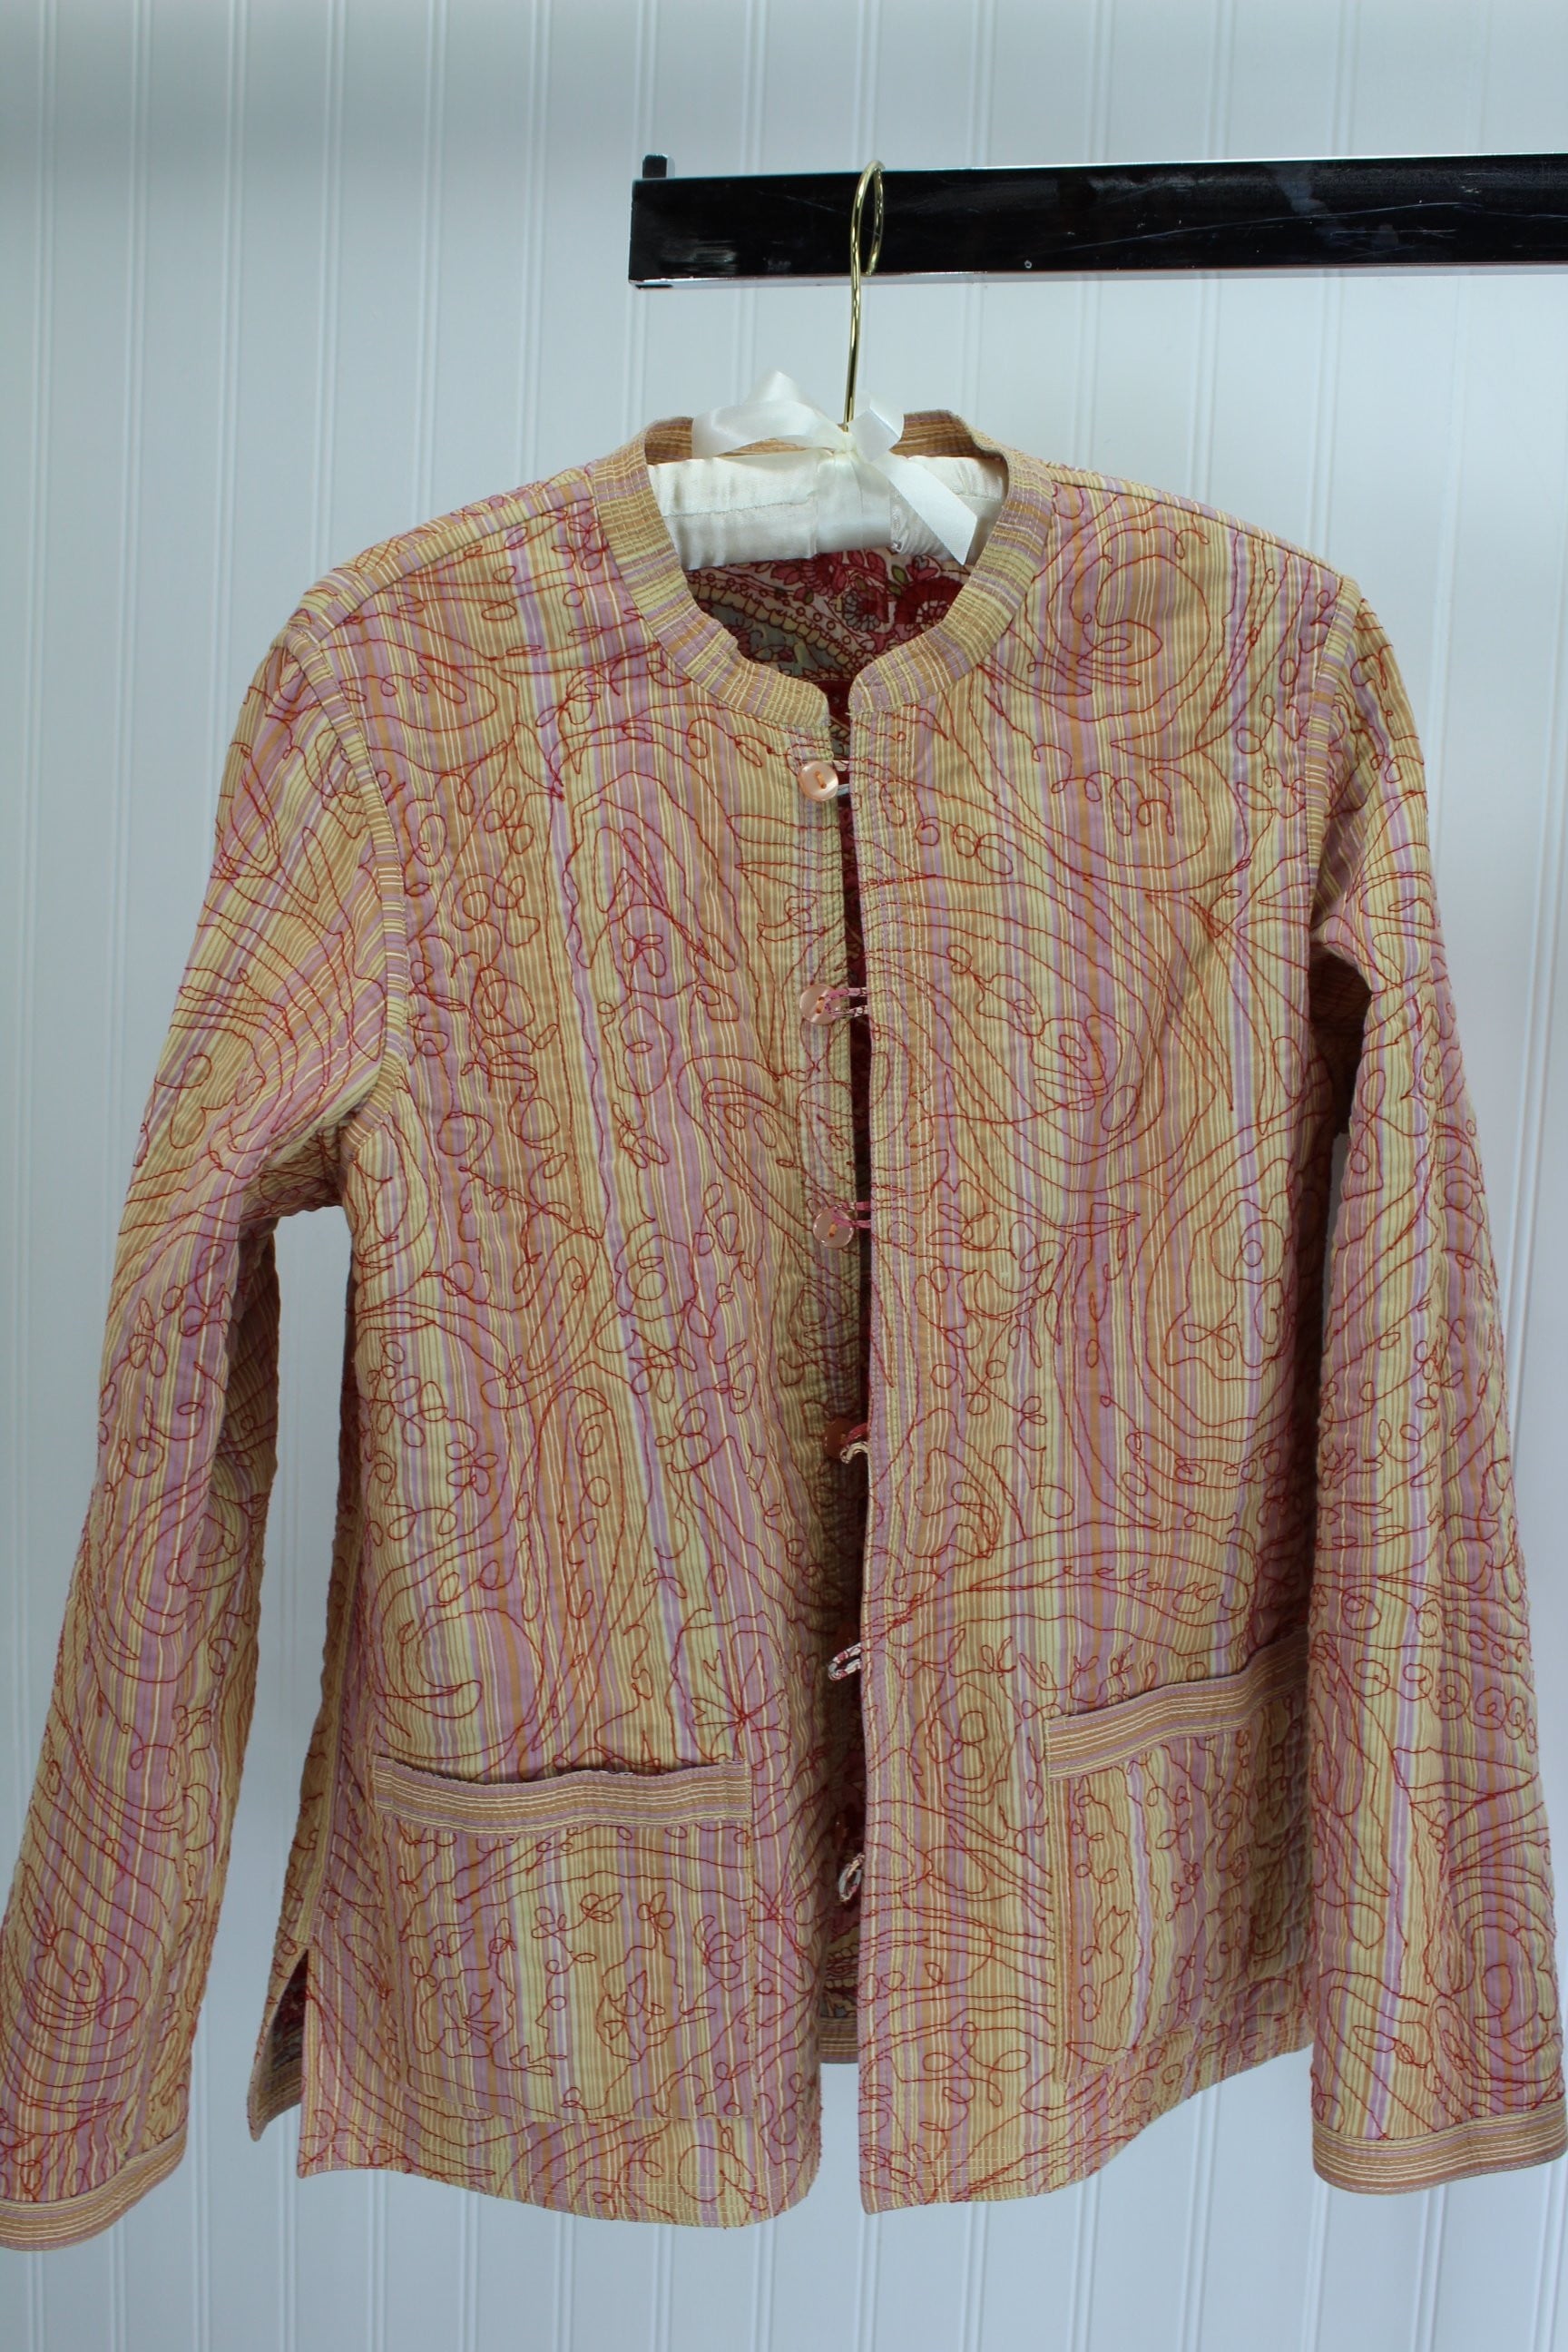 Reversible Quilted Jacket Vera Style Paisley Rose Pink Cream retired